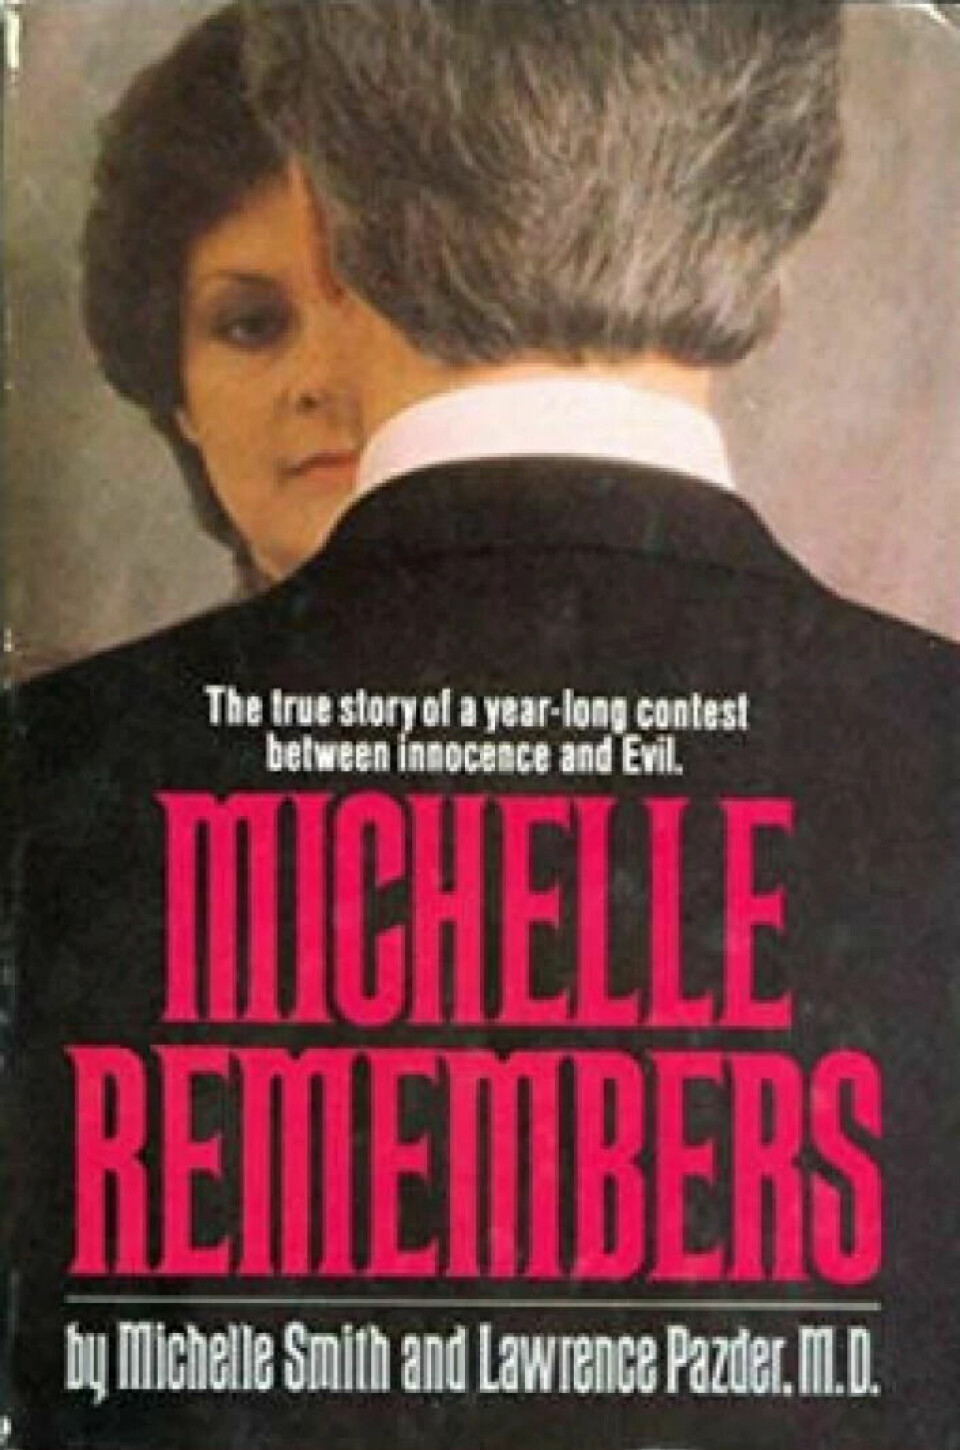 Several books were published featuring stories of patients who suddenly remembered horrific repressed memories. Michelle Remembers was one of the books that received enormous media coverage.